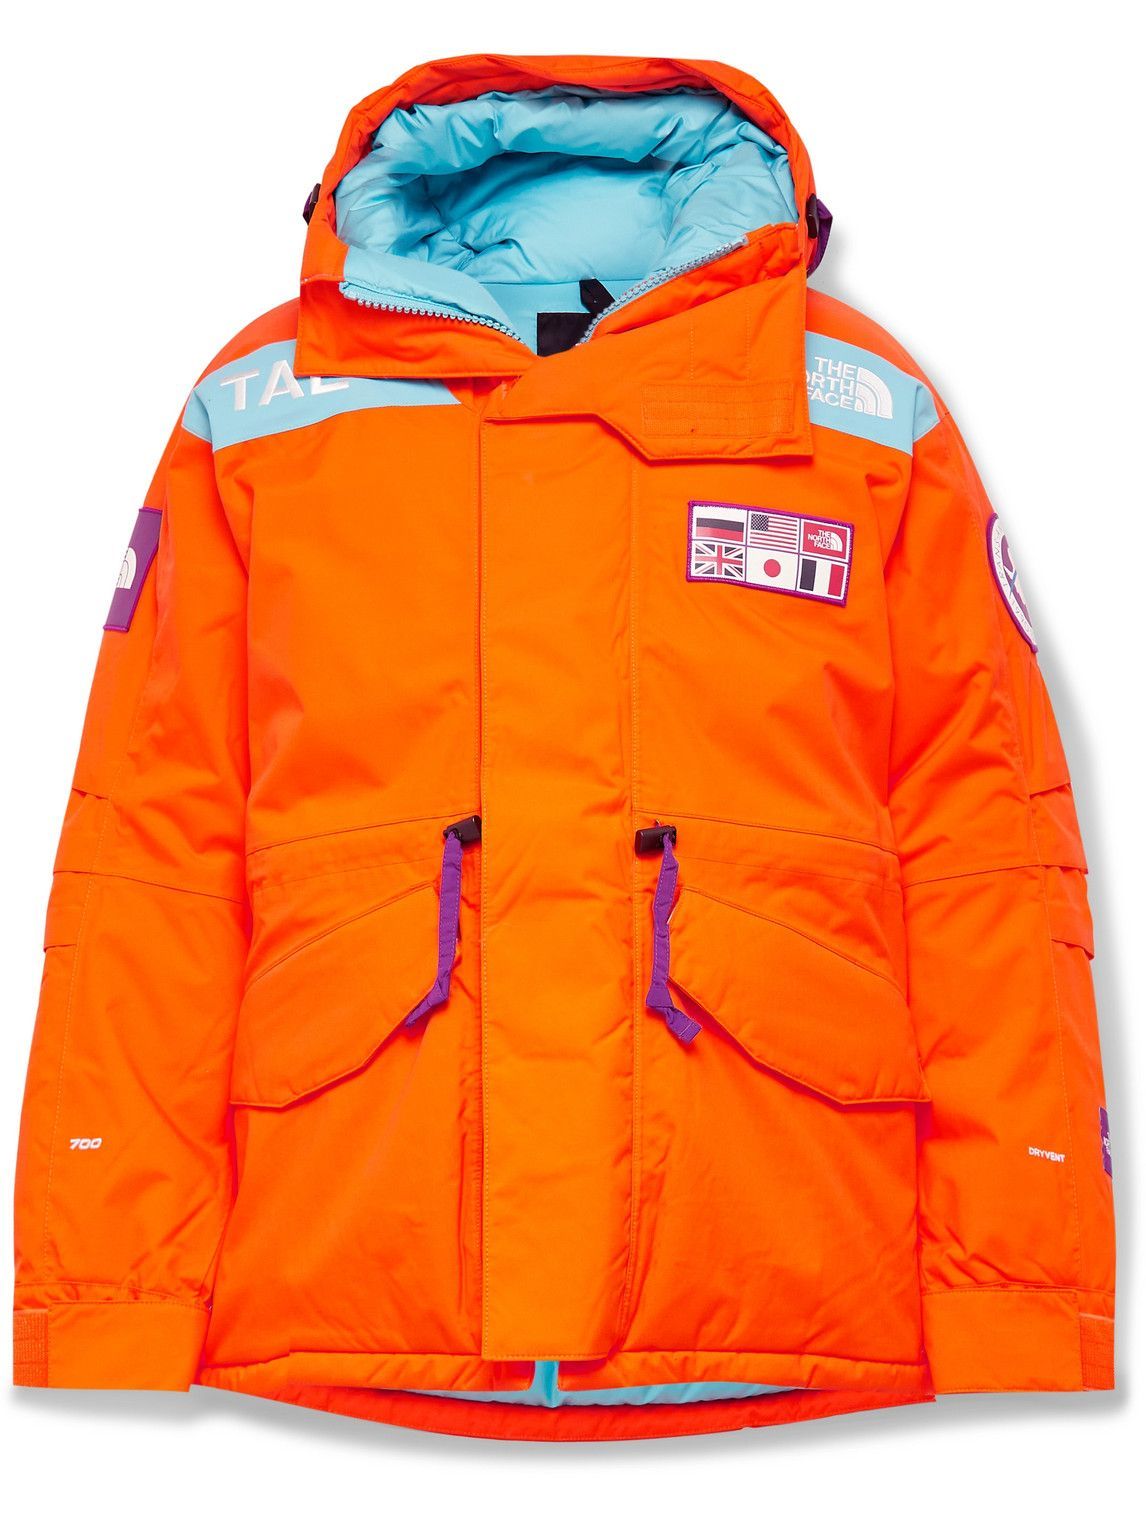 Photo: The North Face - Trans-Antarctica Expedition DryVent Hooded Down Parka - Orange